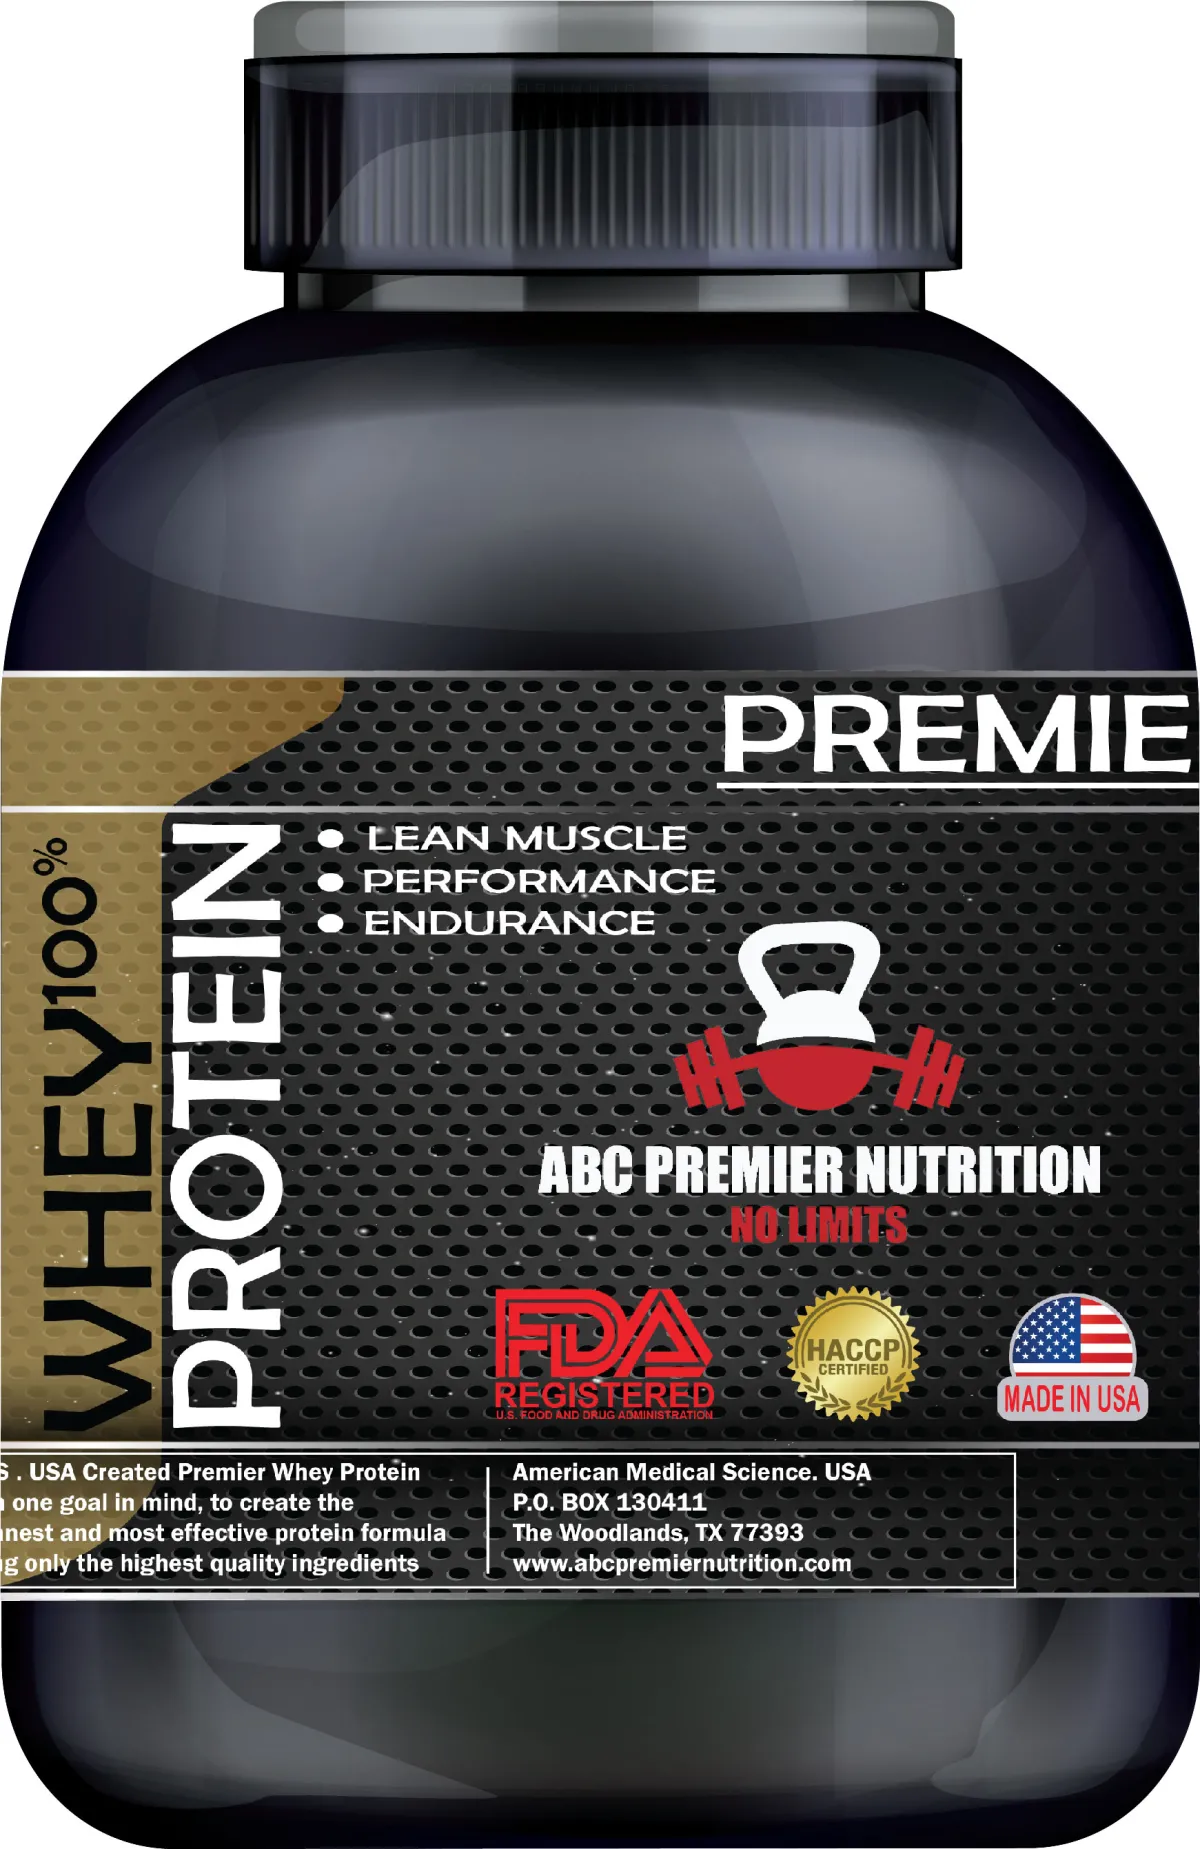 design a premium supplement product label packaging